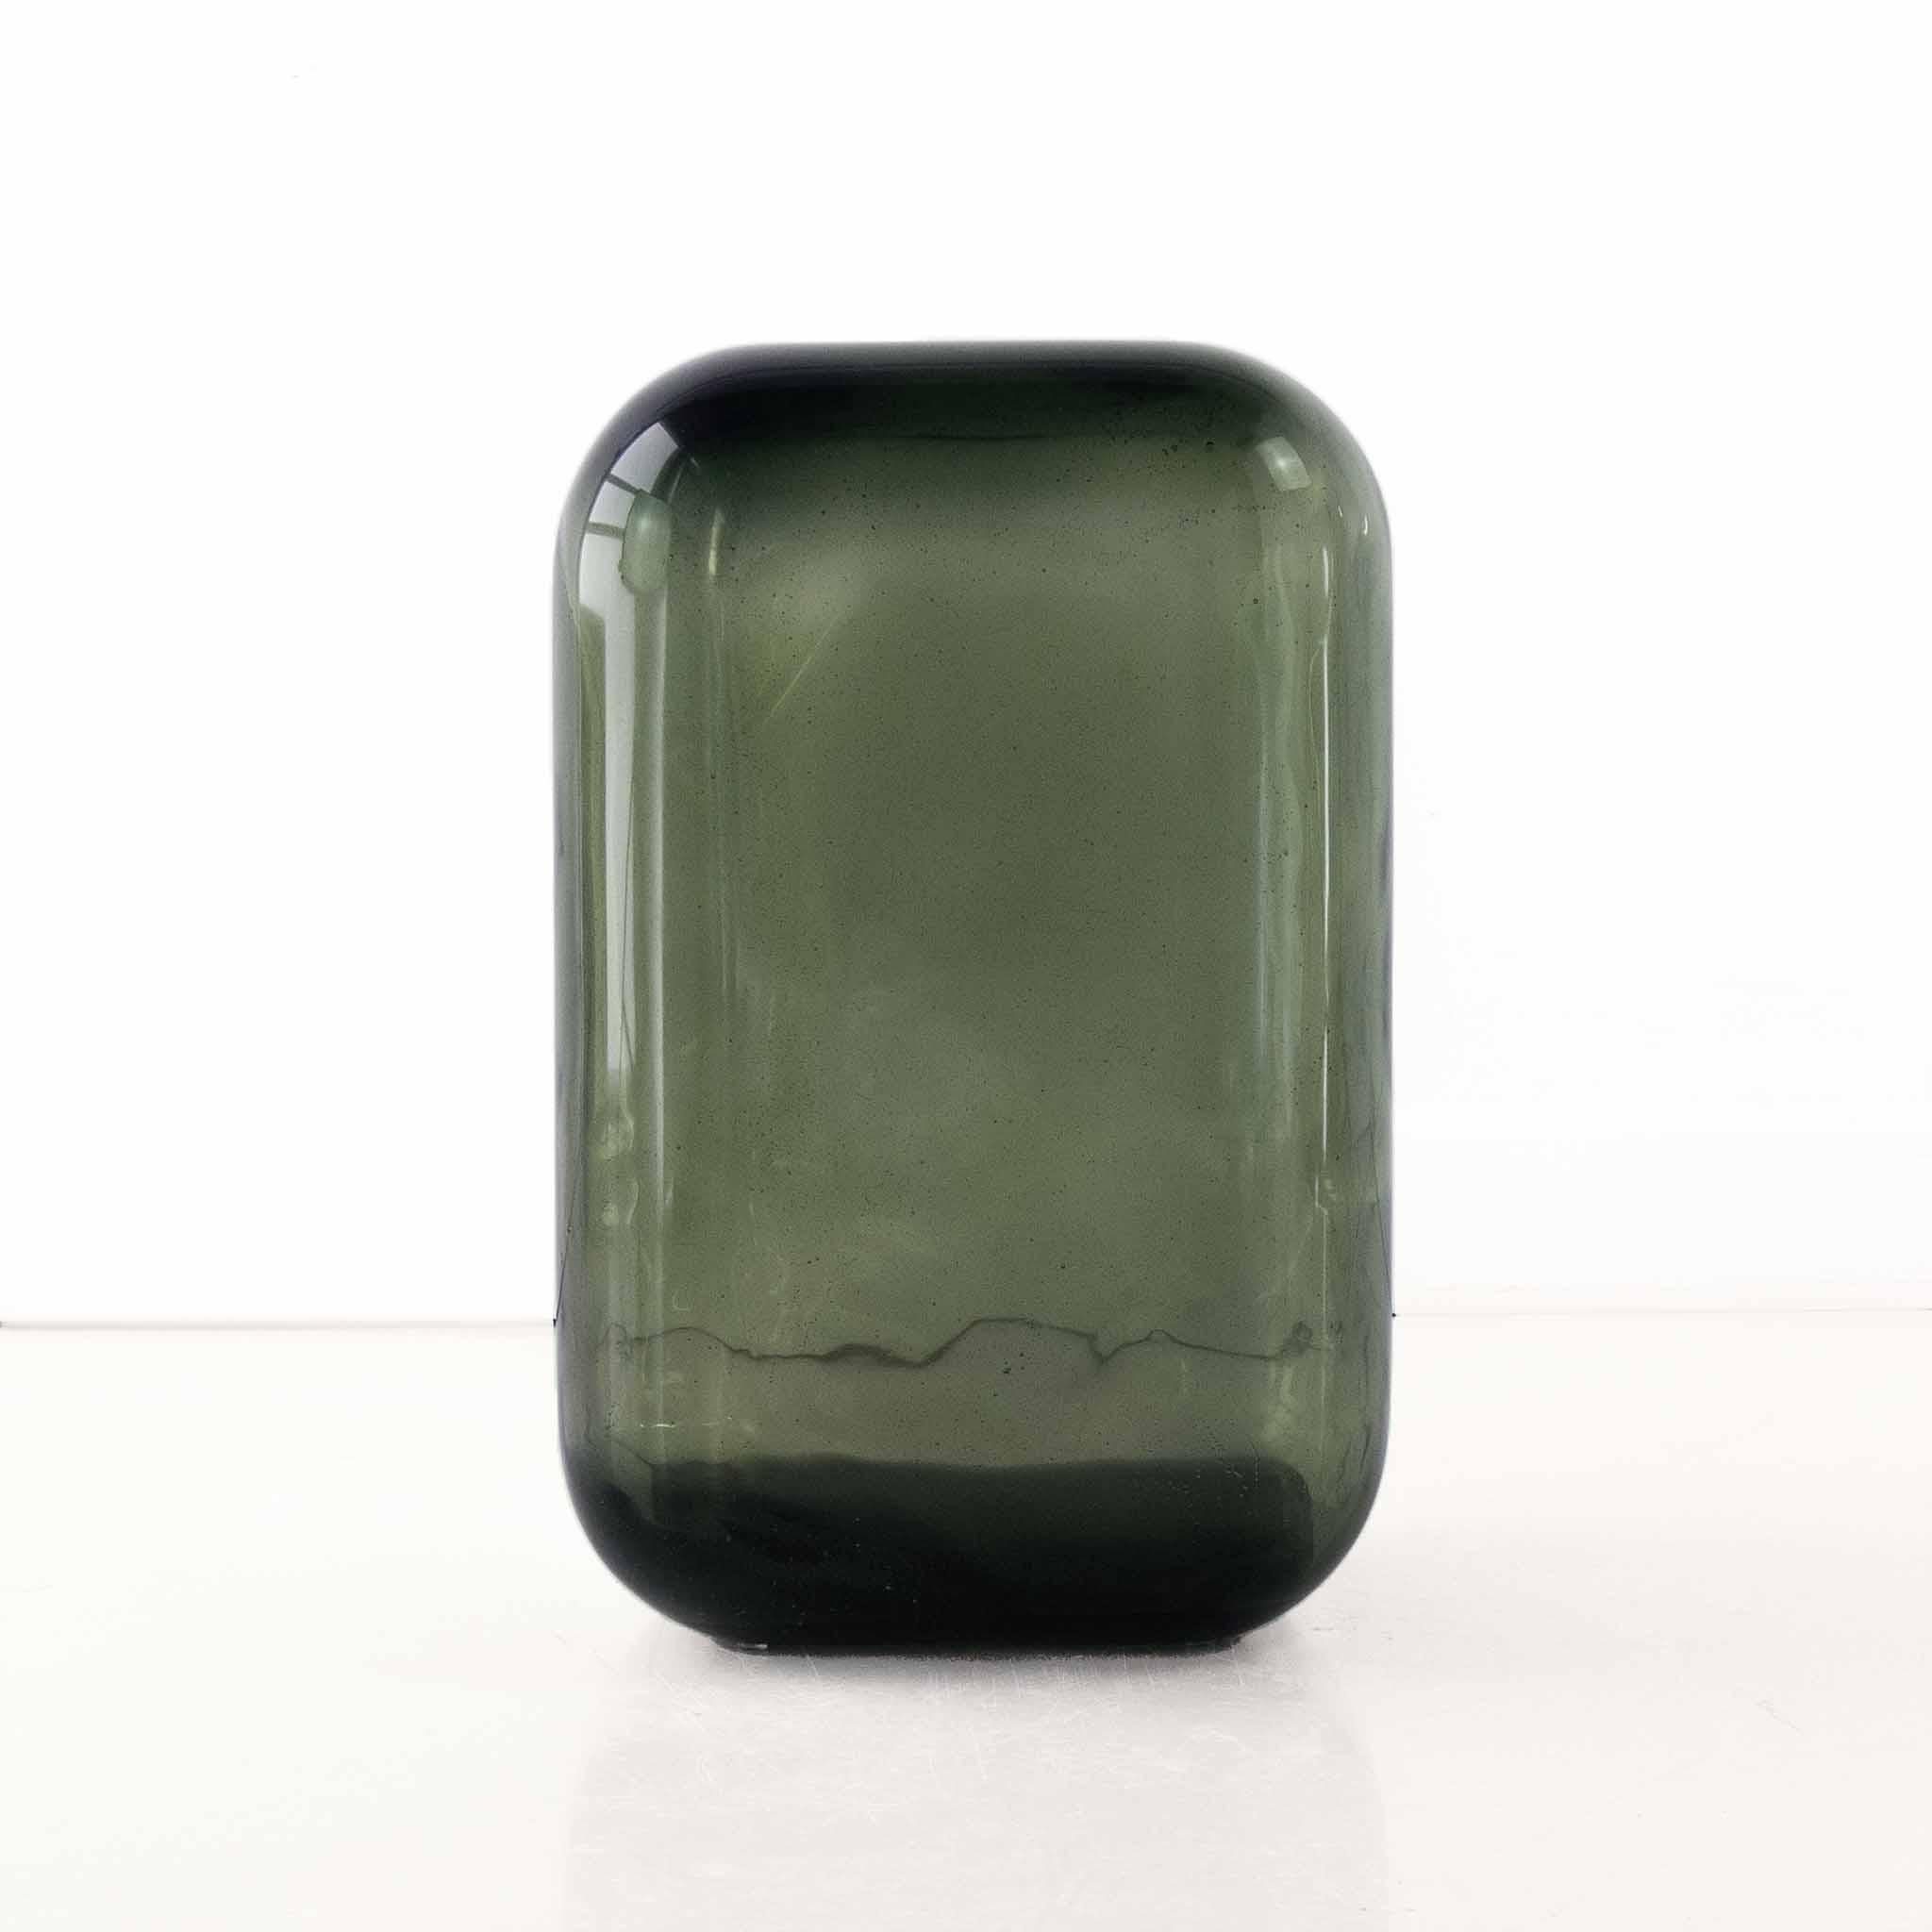 Mist Oort Resin Side Table by creators of objects.
Materials: Resin, pigment
DImensions: W 56 x D 36 x H 36 cm
Also Available: Tourmaline, Bordeaux, Spice, Ochre, Forest, Ocean, Twilight, Rock, Lilac, Cerise, Coral Spice, Honey, Moss, Surf, Eve,